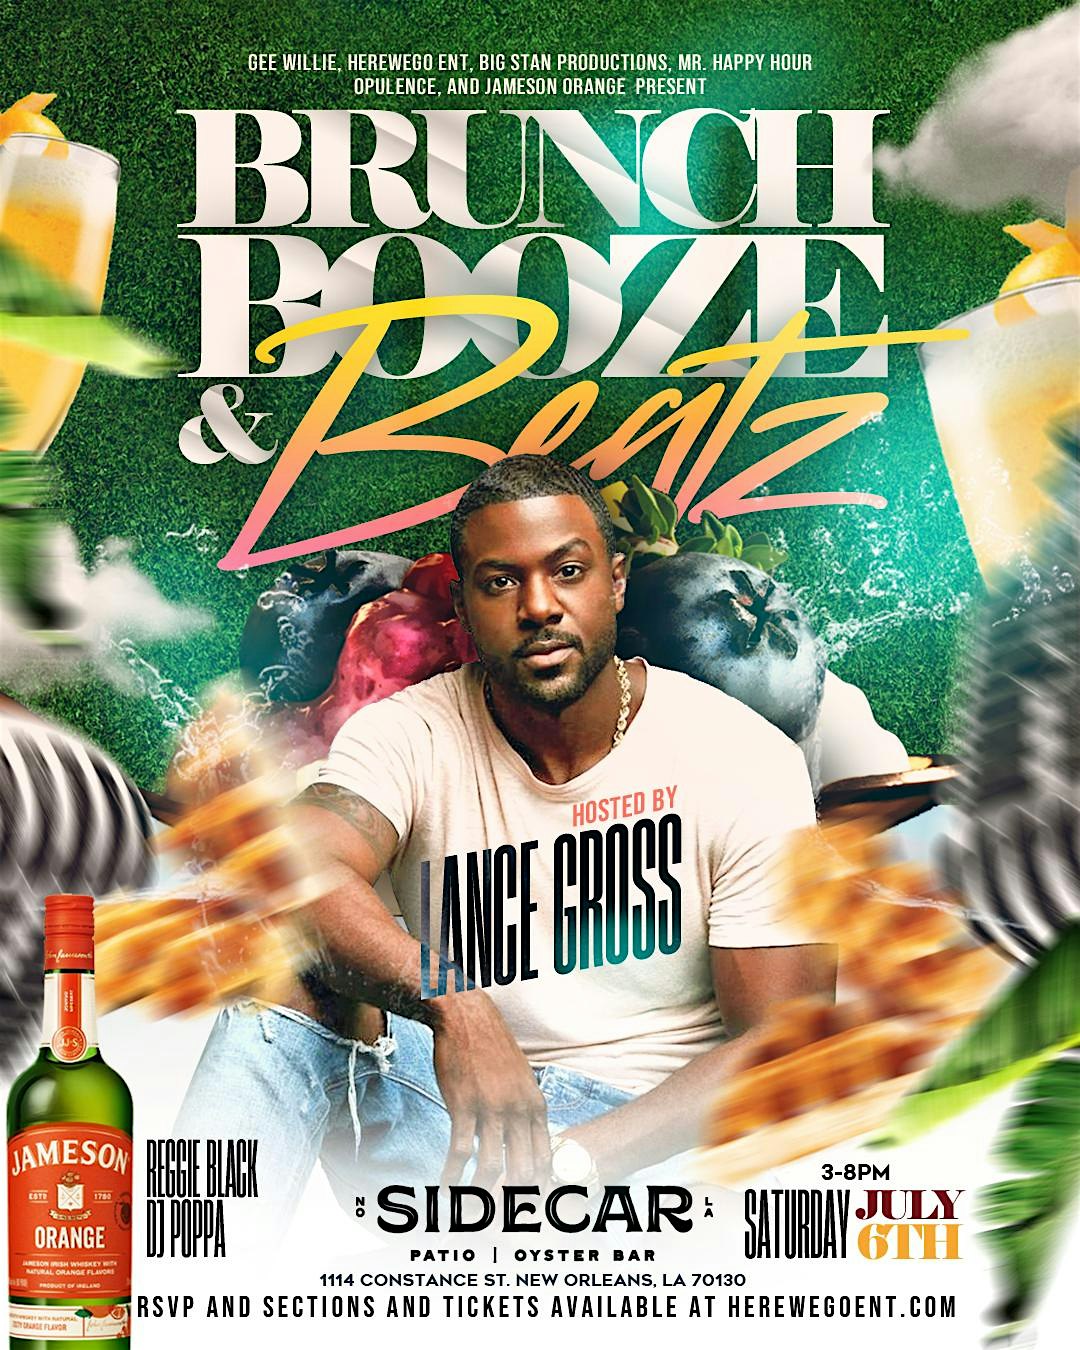 BRUNCH, BOOZE & BEATZ DAY PARTY HOSTED BY LANCE GROSS SAT. 7/6 @ SIDECAR – New Orleans, LA